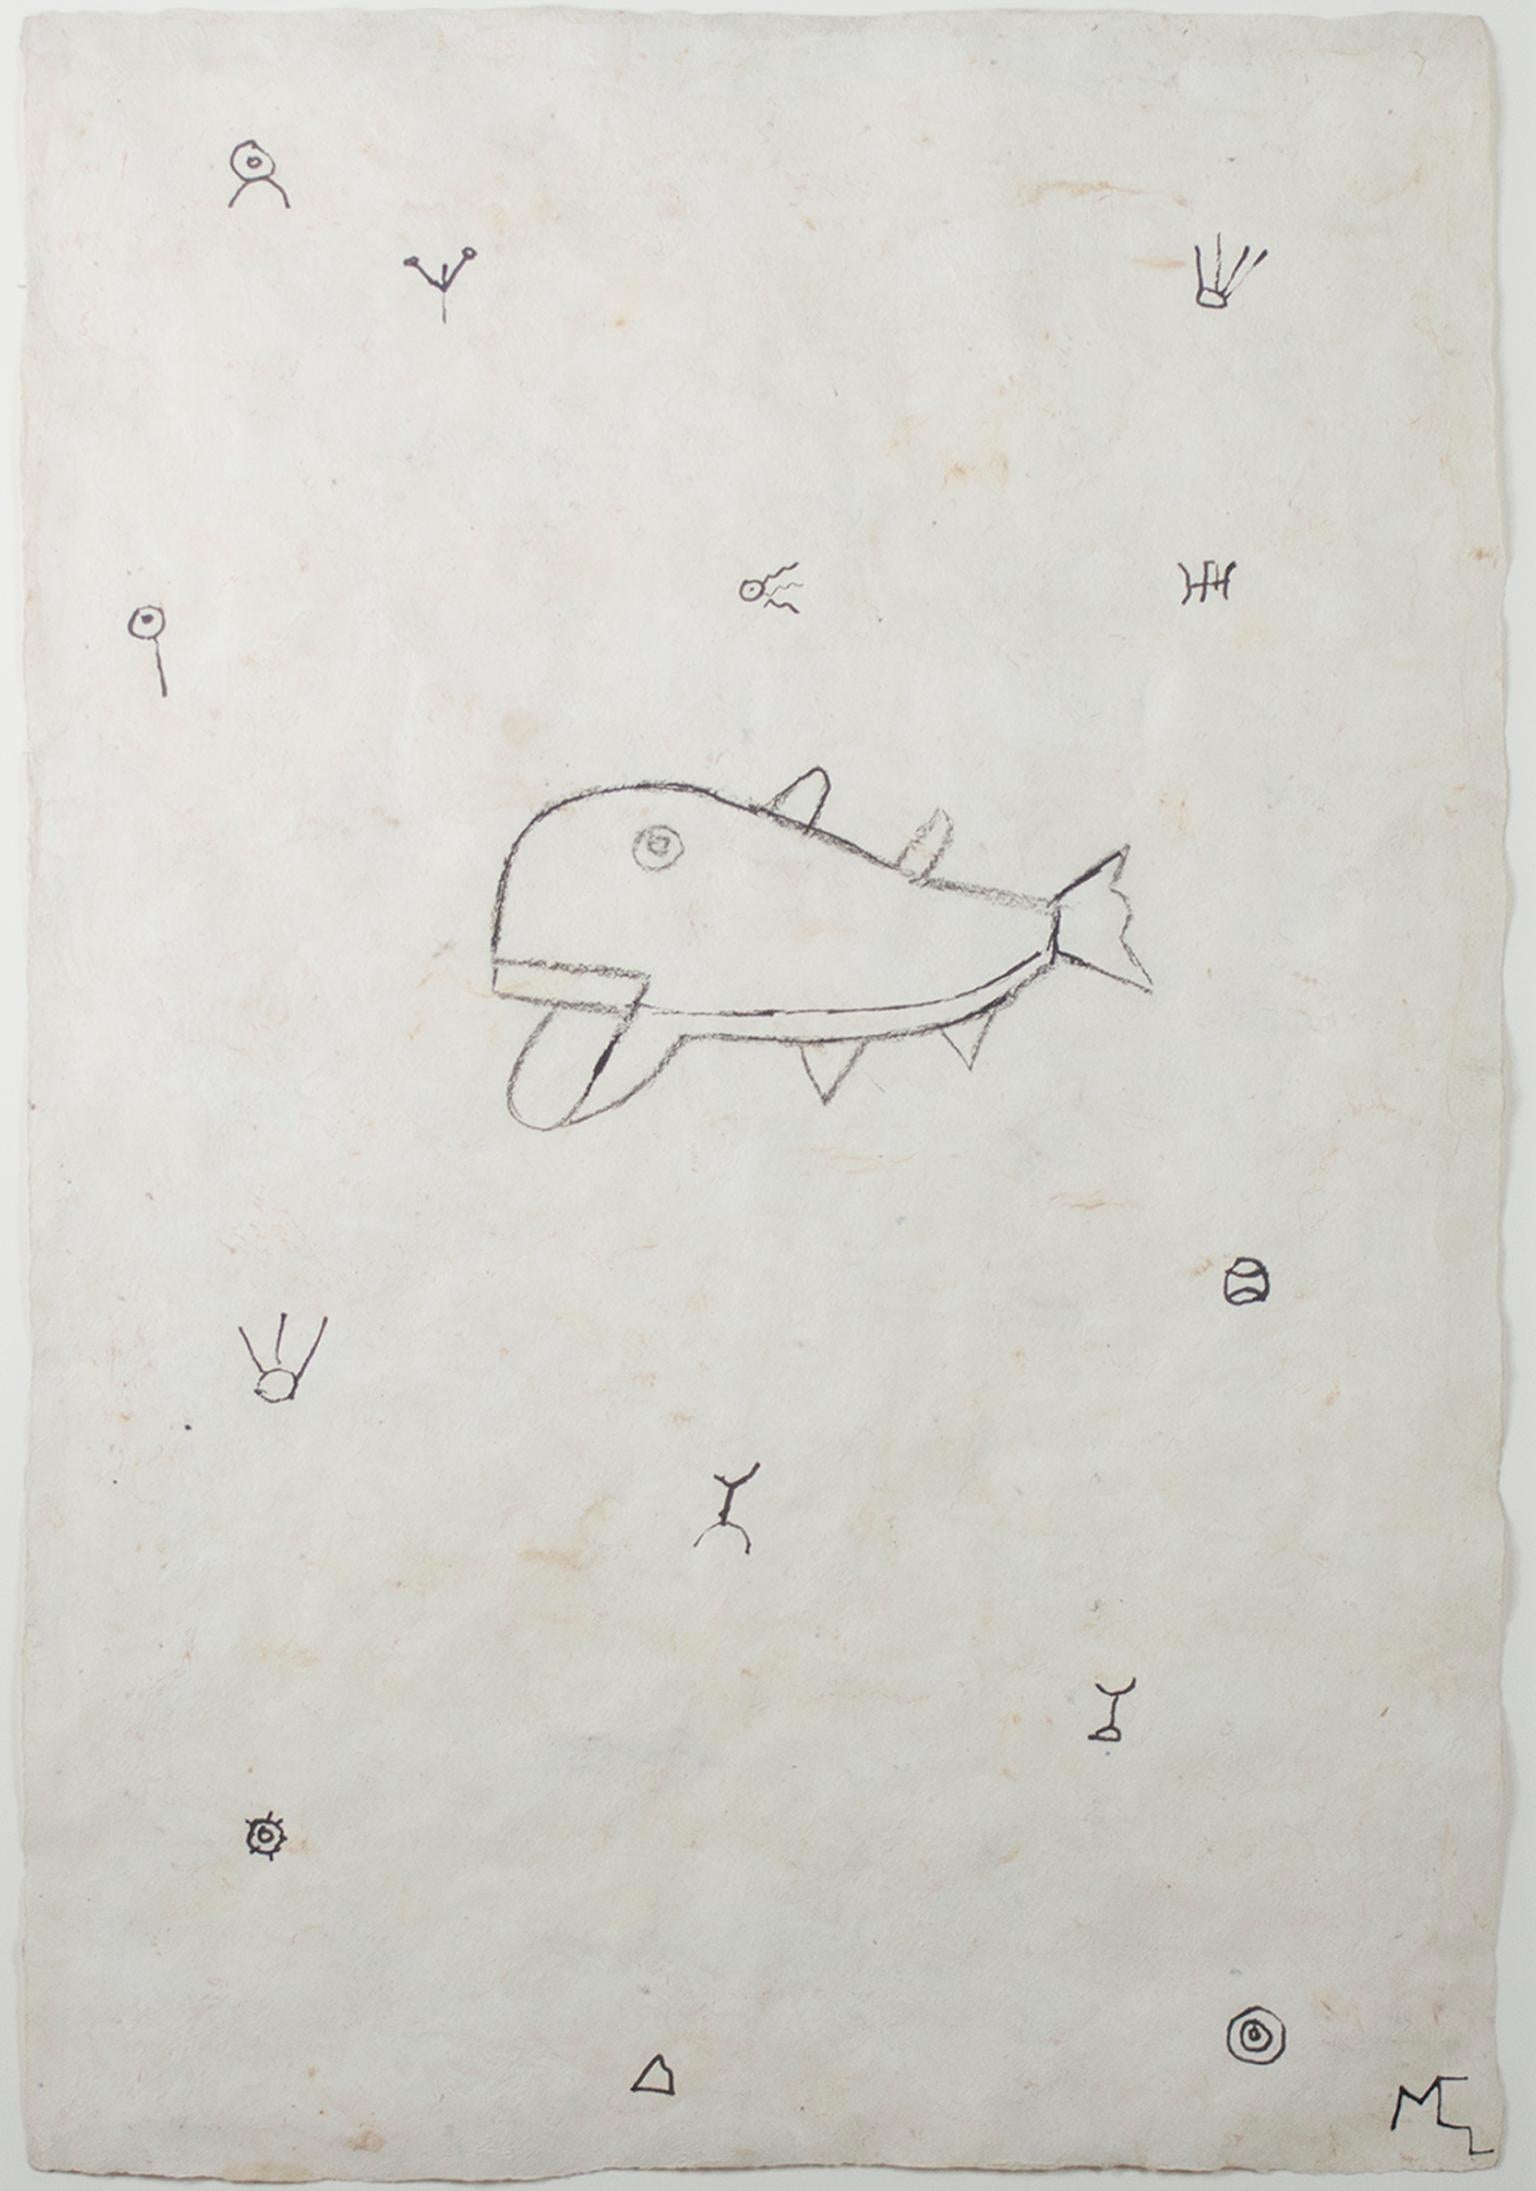 "Whale in a Sea of Symbols, " Drawing on Handmade Paper by Miguel Castro Leñero